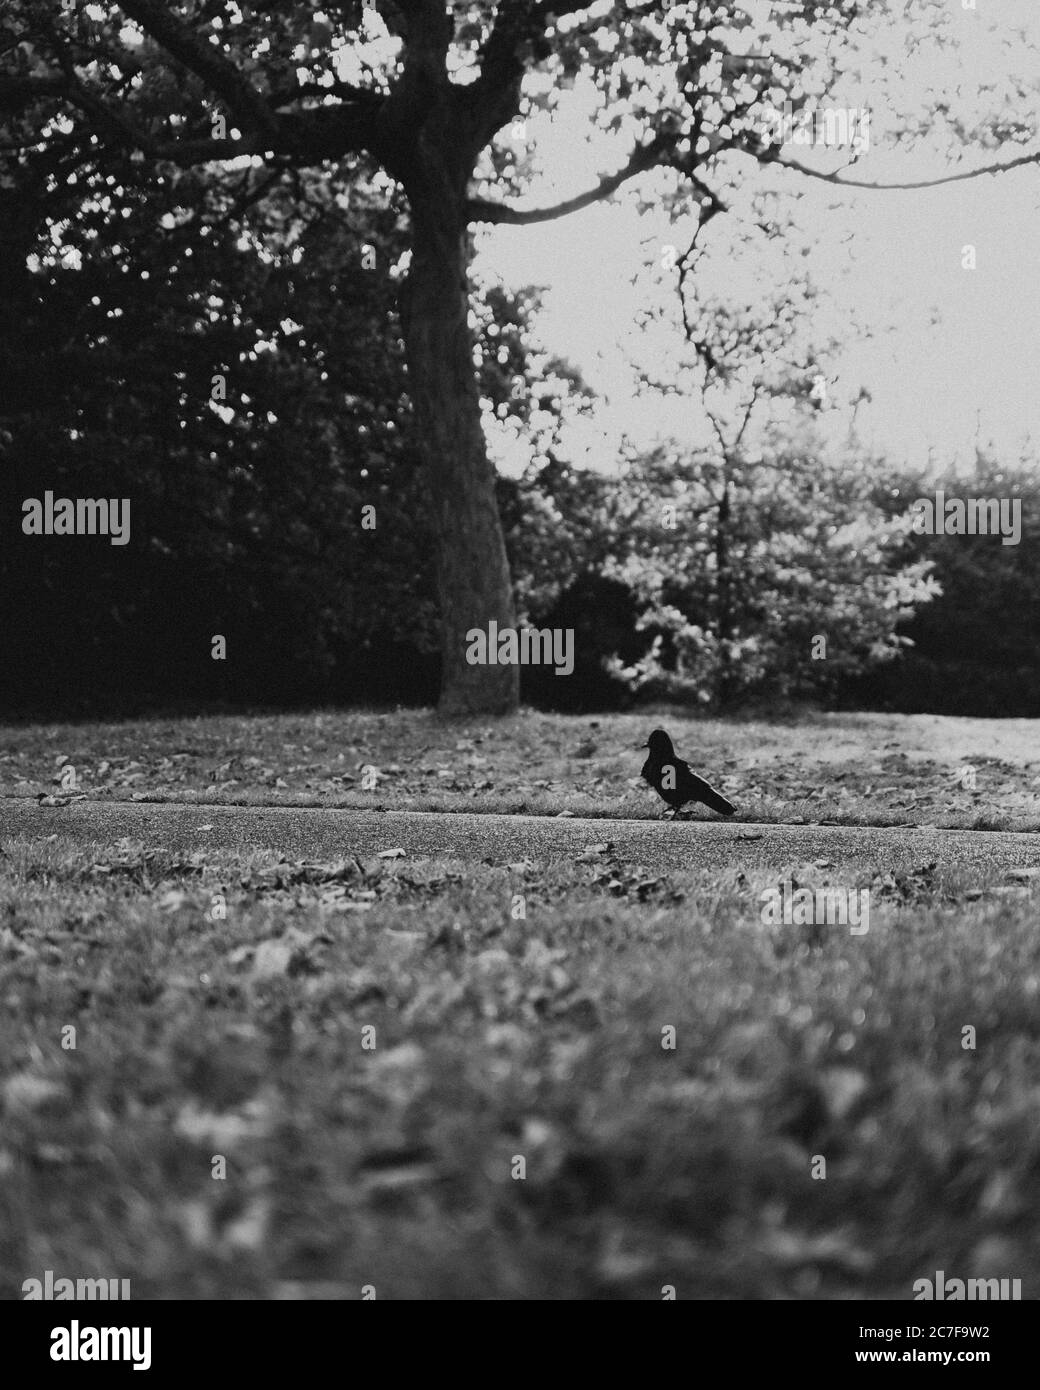 Greyscale shot of a lonely bird in a grassy field near a blossomed tree Stock Photo